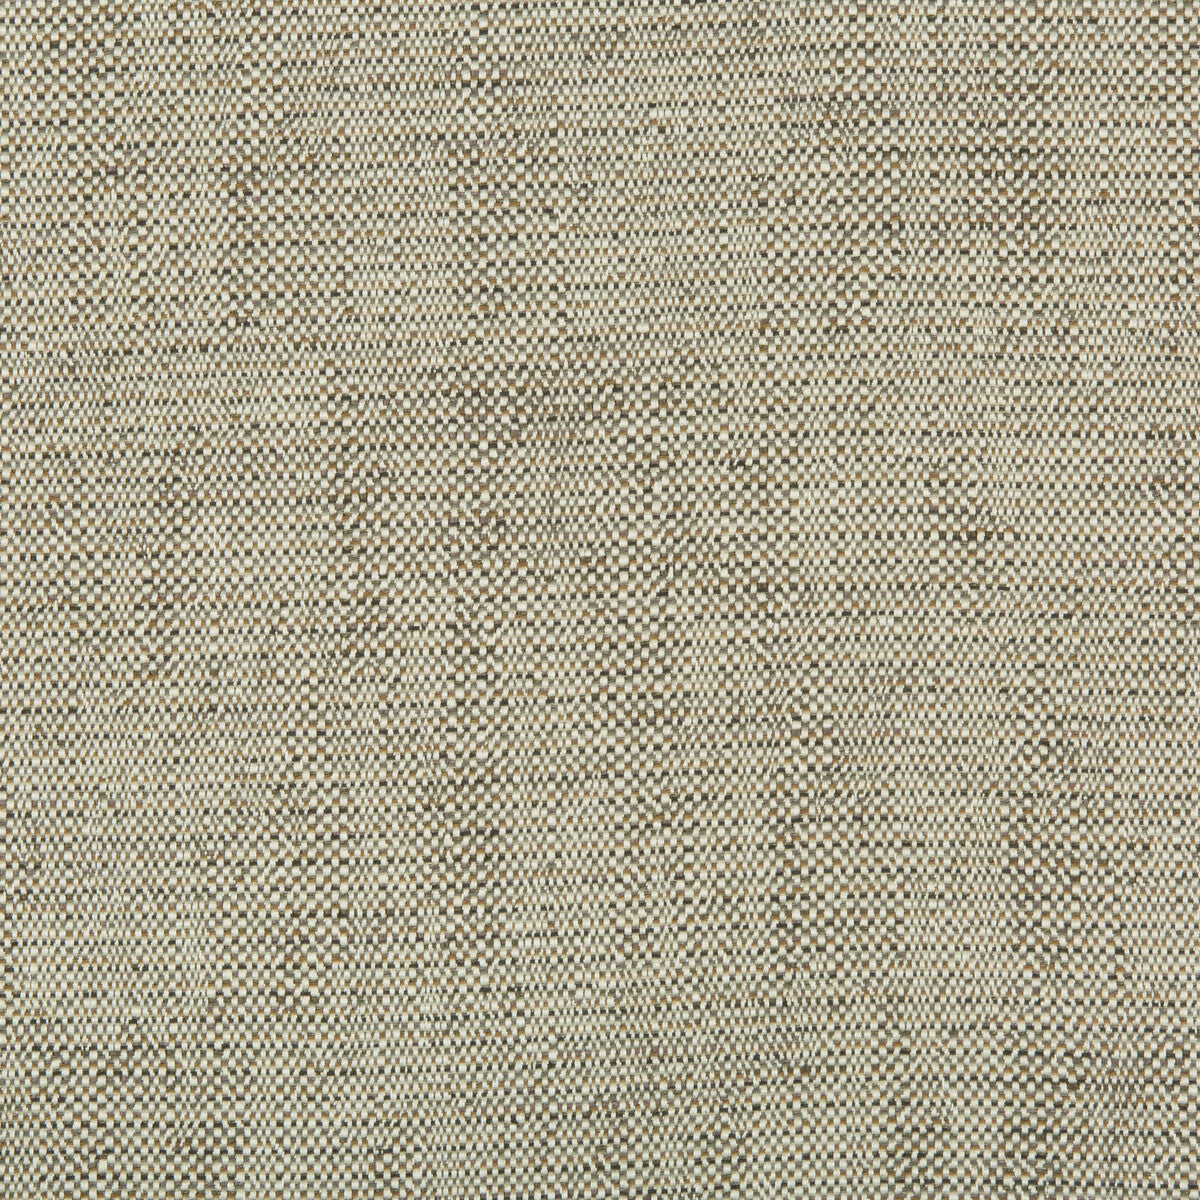 Kravet Design fabric in 35135-1611 color - pattern 35135.1611.0 - by Kravet Design in the Performance Crypton Home collection